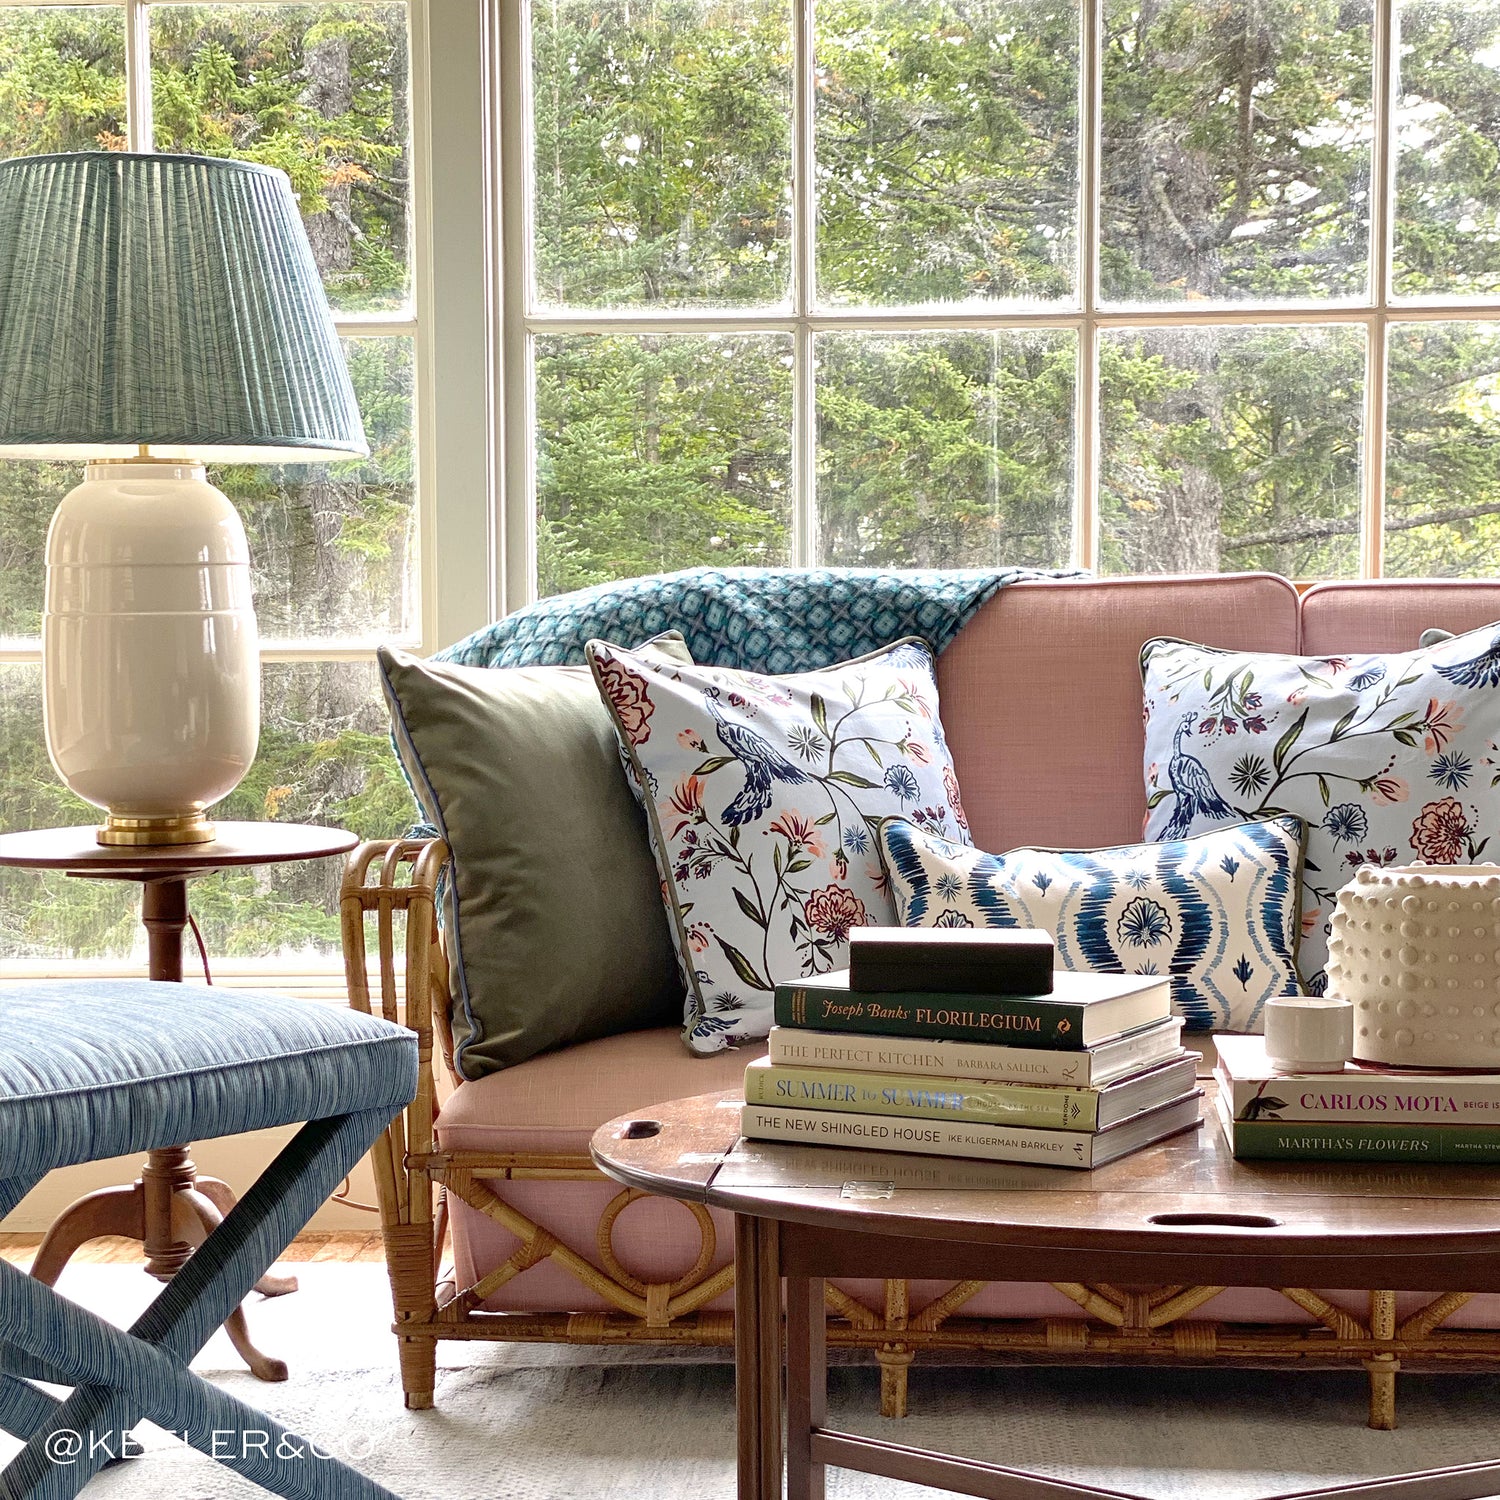 In front of a clear window with a Coral Couch with Fern green pillow, daphne powder pillow and blue itak pillow besides a wooden small table and green and white lamp on top. Wooden circular coffee table in front of couch with two stacks of books. Photo taken bye Keeler & Co.